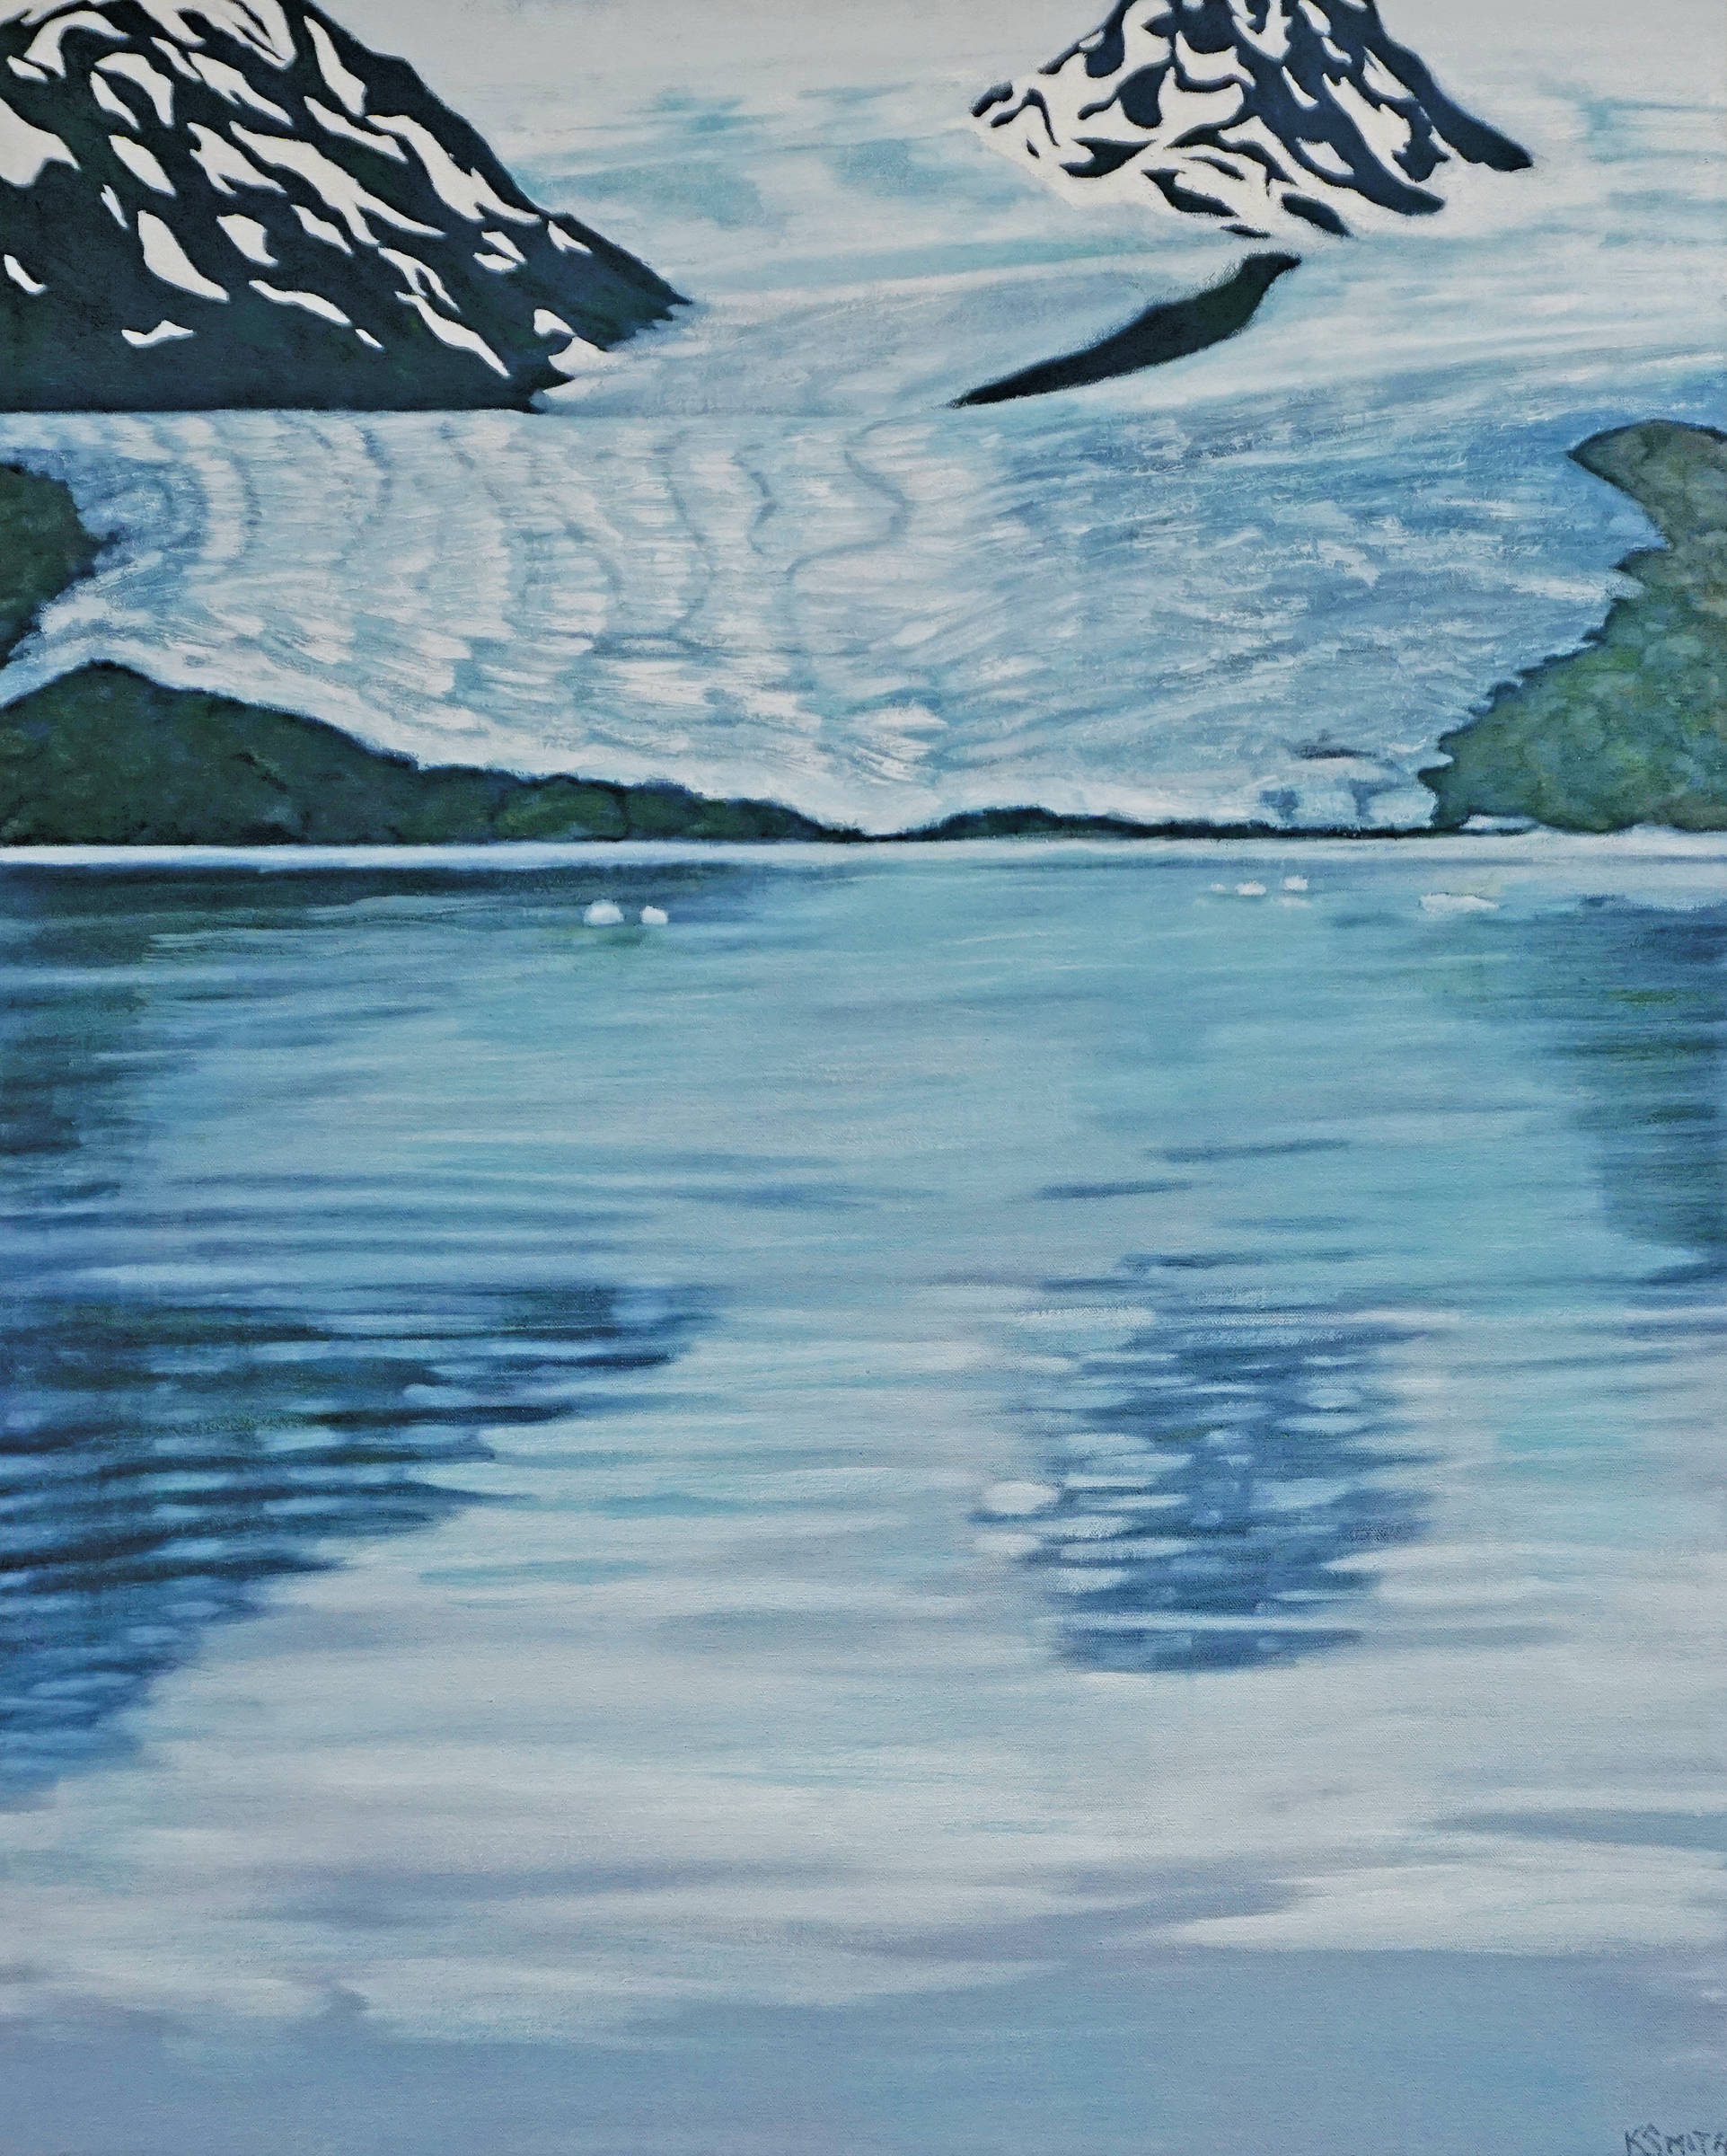 Kathy Smith’s “Grewingk Glacier Terminus,” a painting in her exhibit, “Rivers of Ice,” showing at the Pratt Museum in Homer, Alaska. (Photo by Michael Armstrong/Homer News)